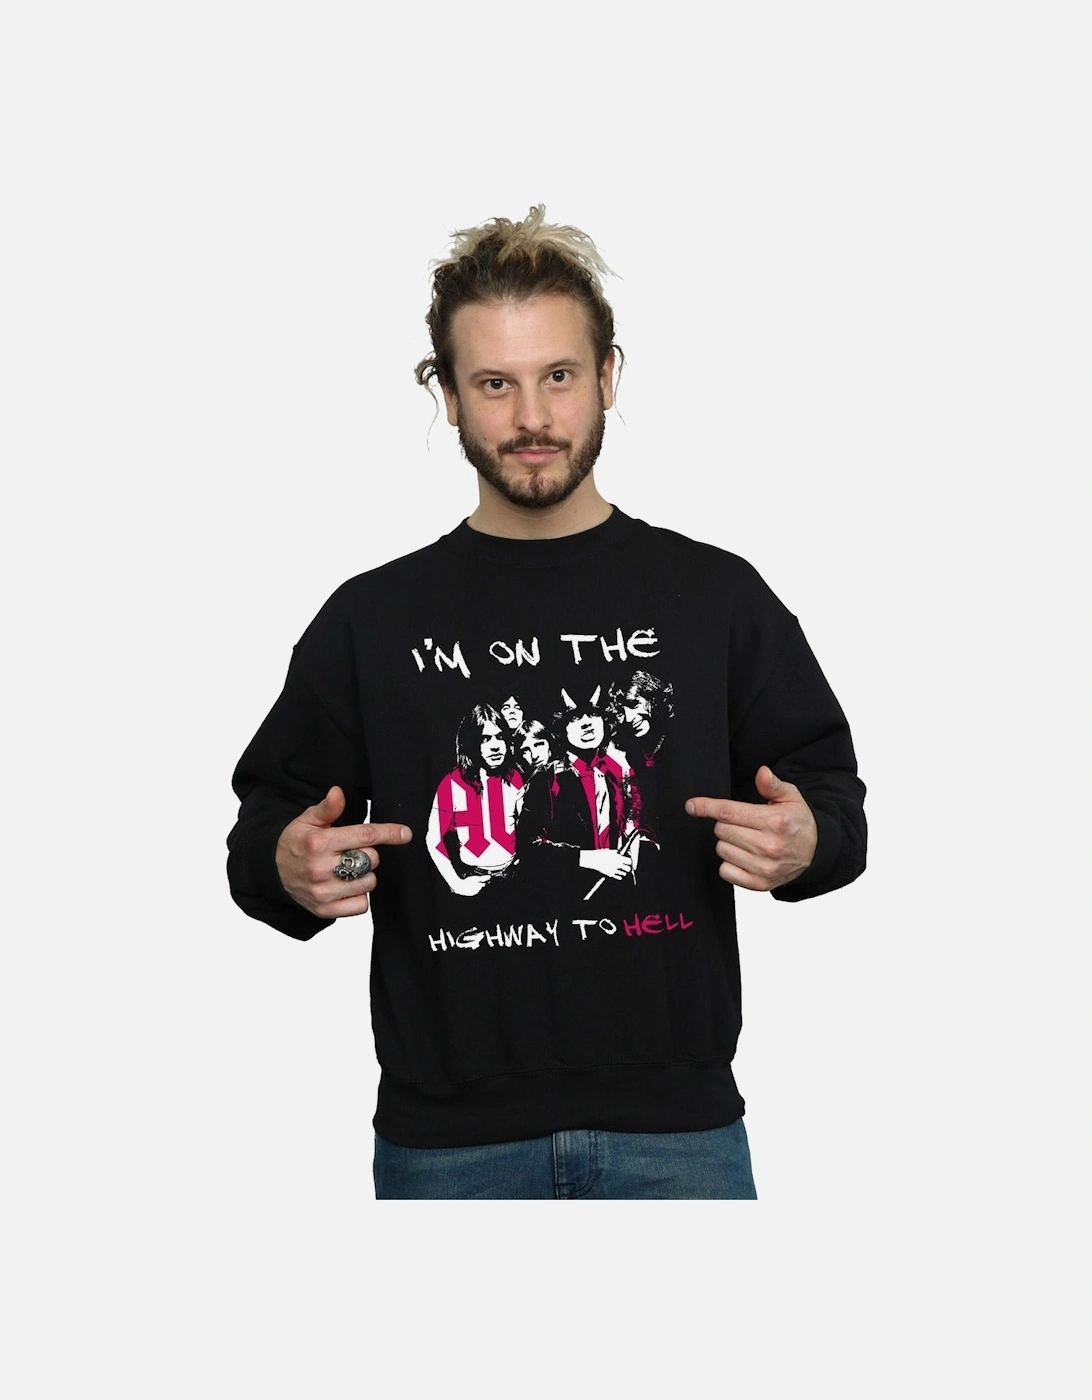 Mens I?'m On The Highway To Hell Sweatshirt